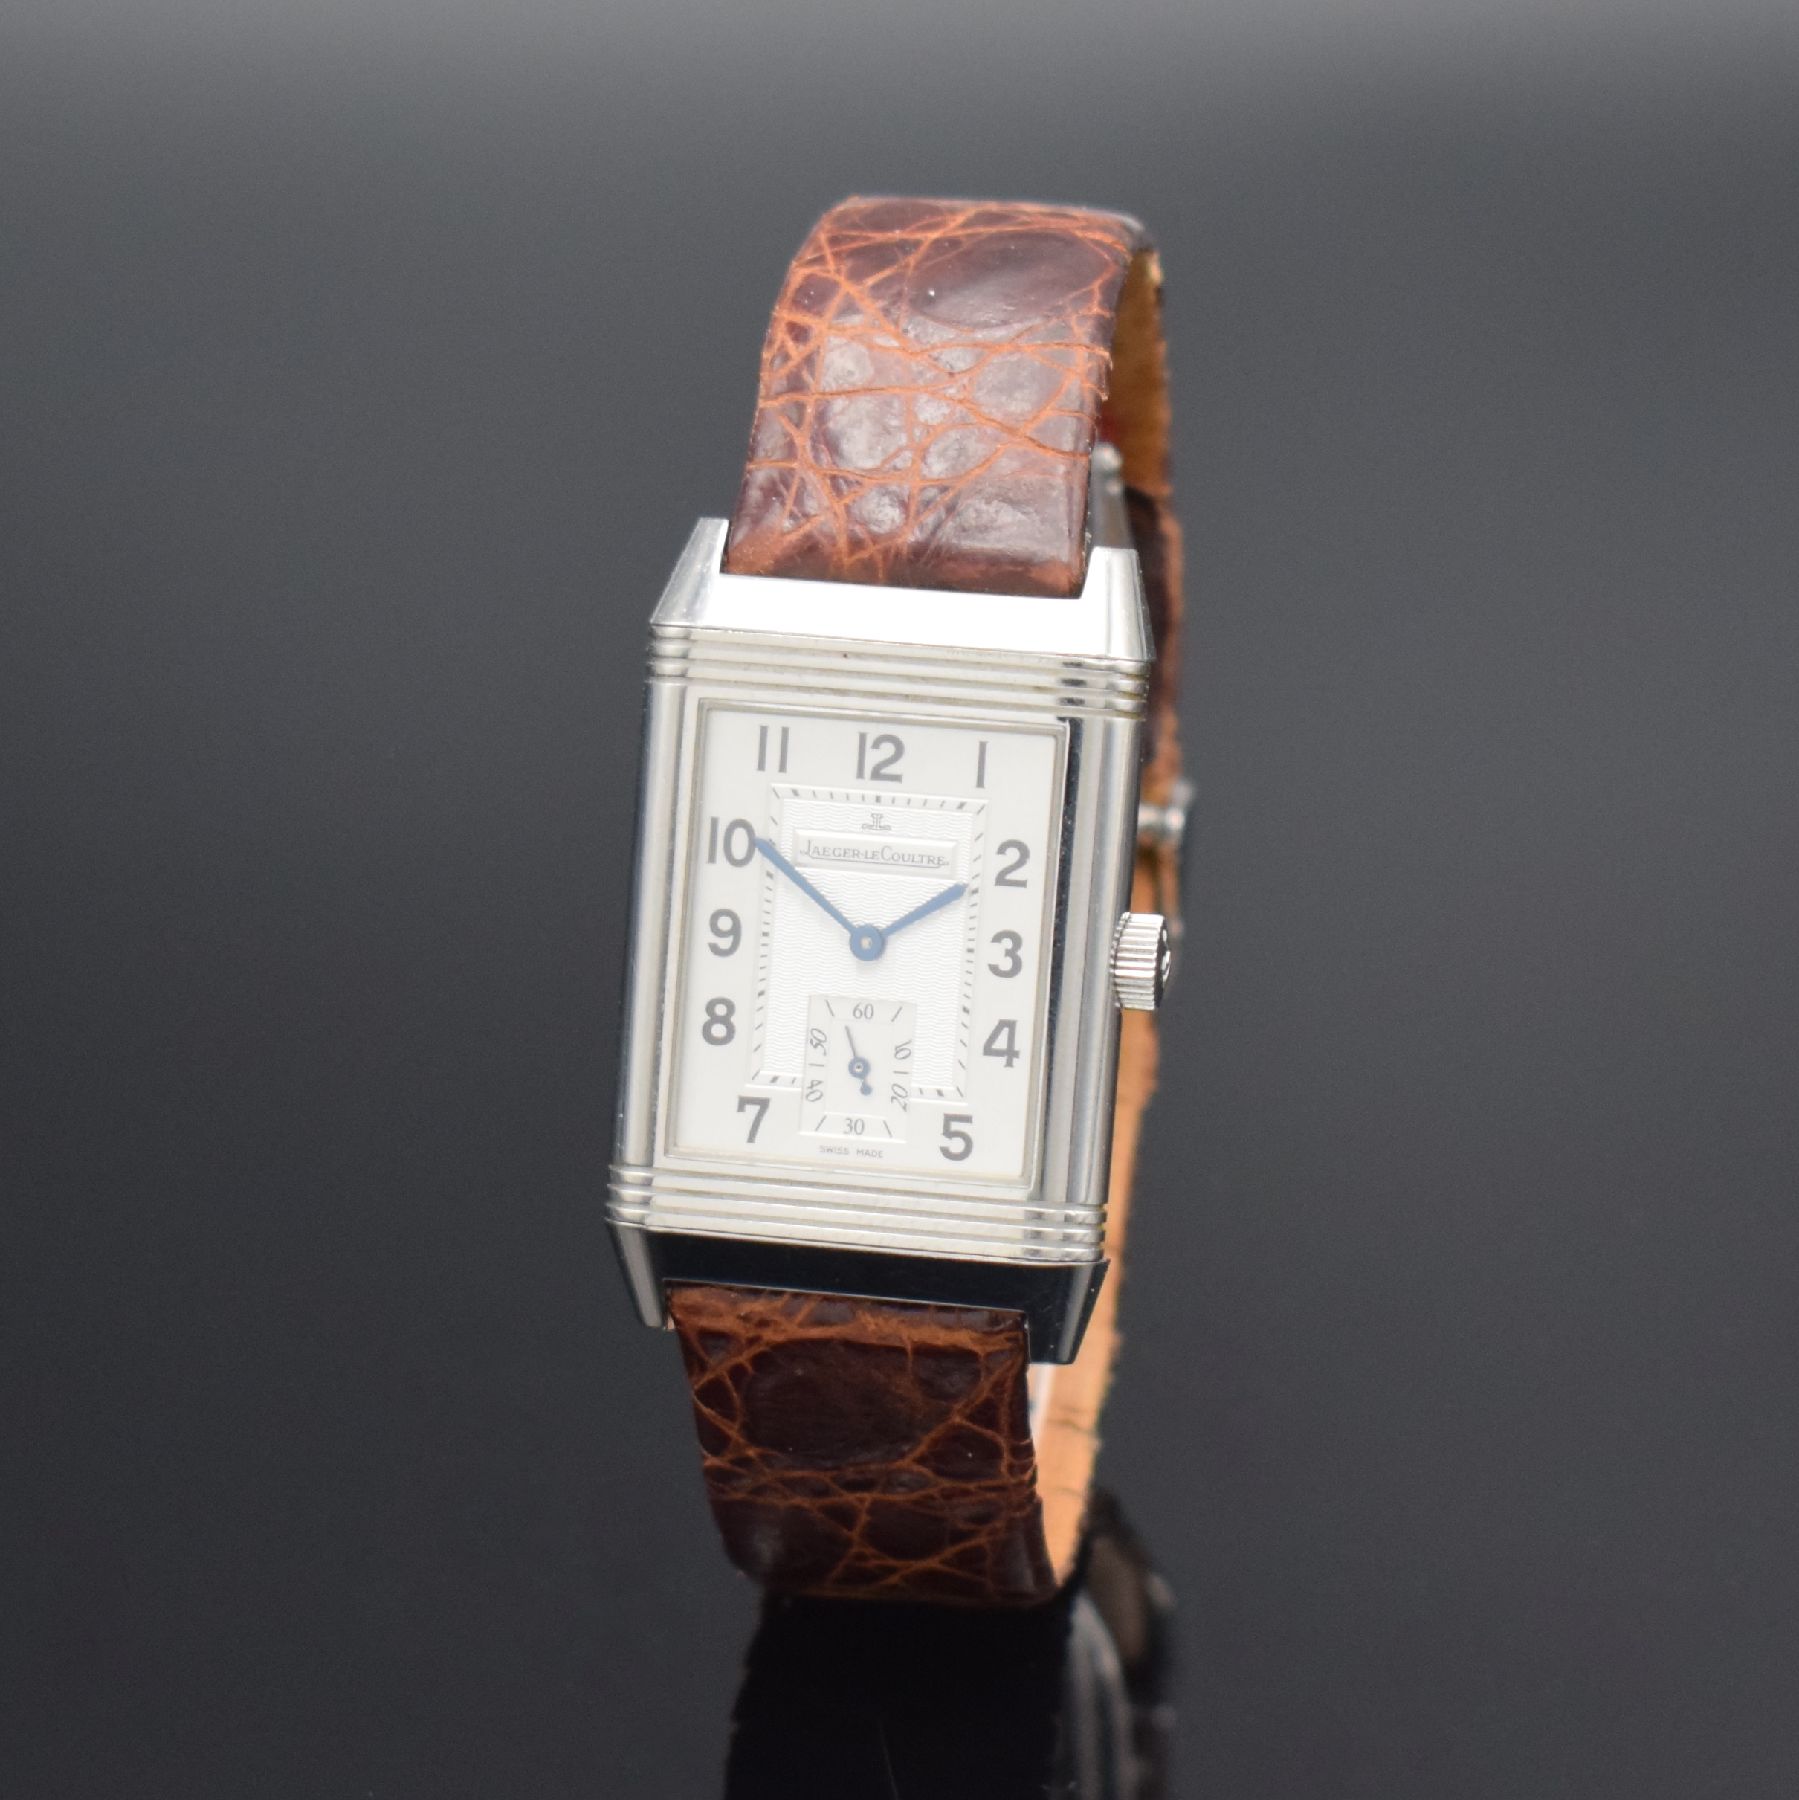 Jaeger-LeCoultre Reverso Grand Taille Armbanduhr in Stahl, - Image 5 of 11